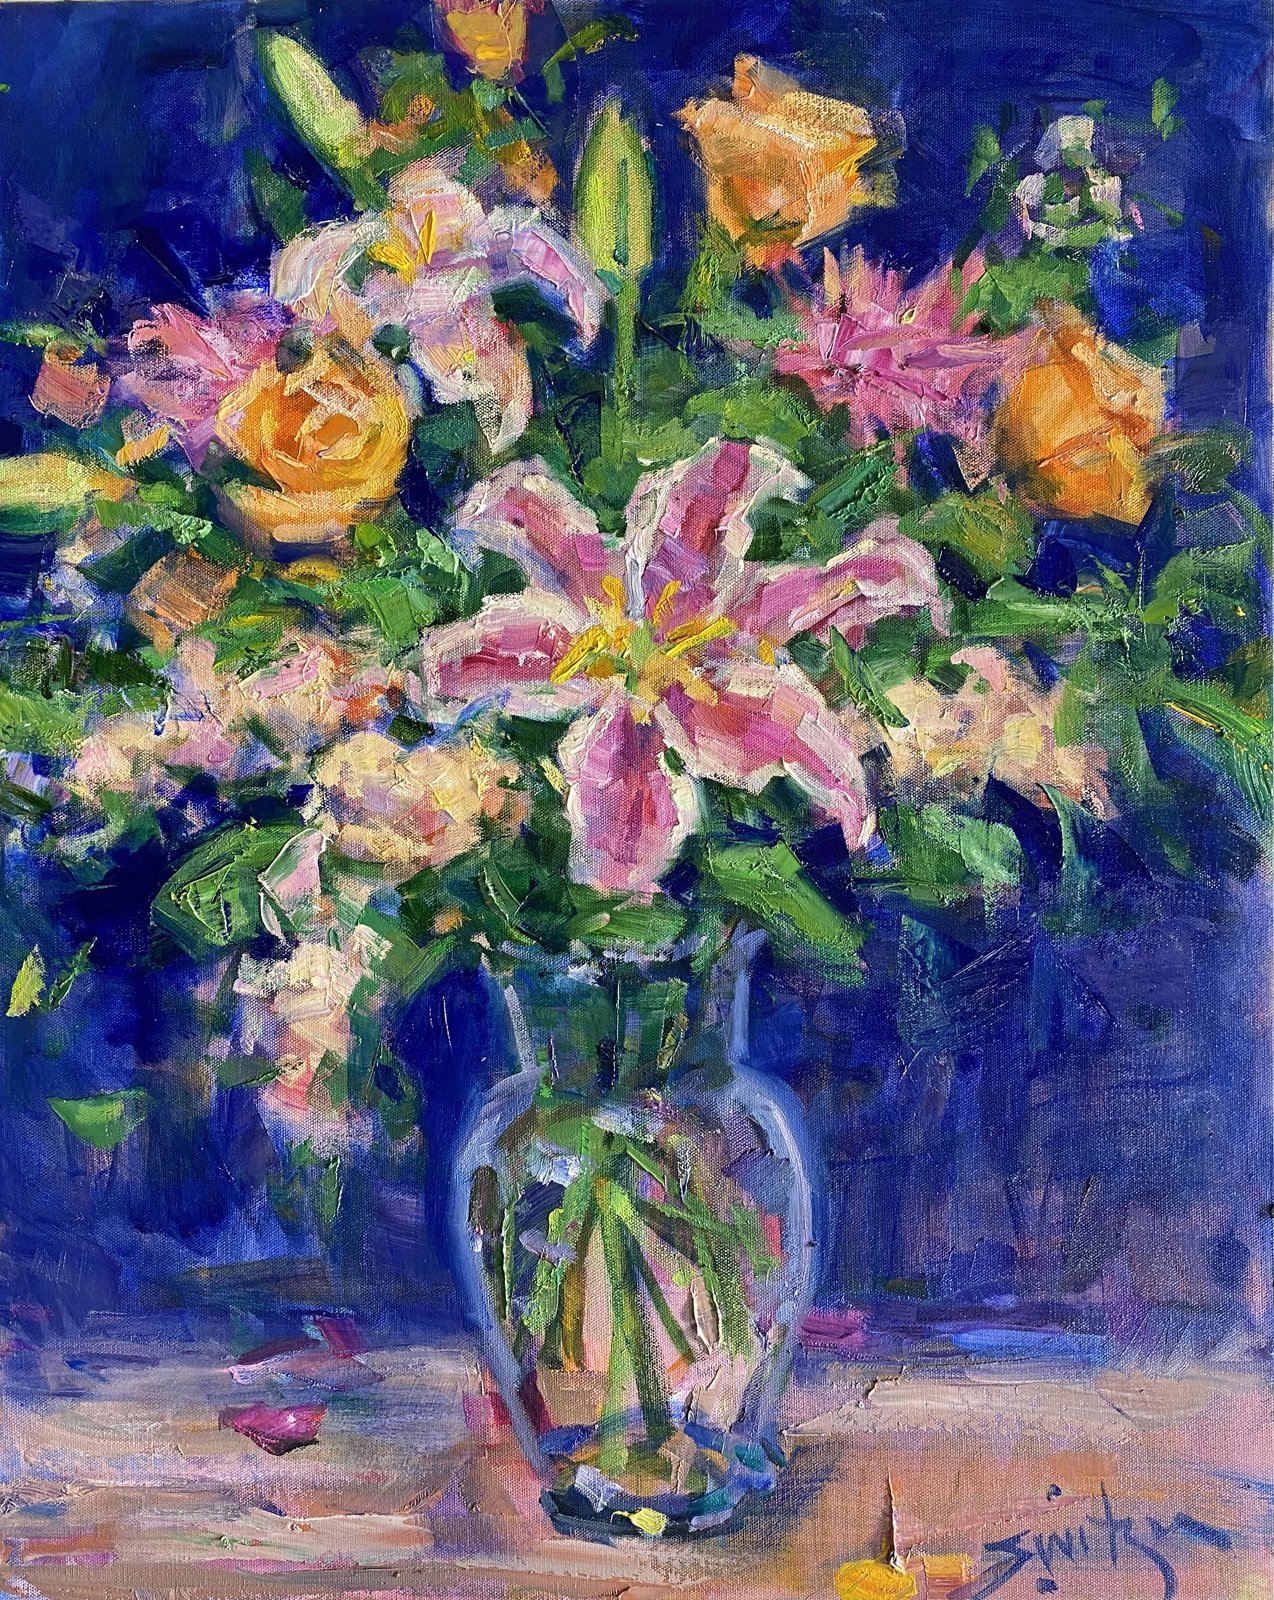  “Tiger Lilly,”                                                                                   24x36 inches,                                                                                    oil on canvas  Dana Gallery                            